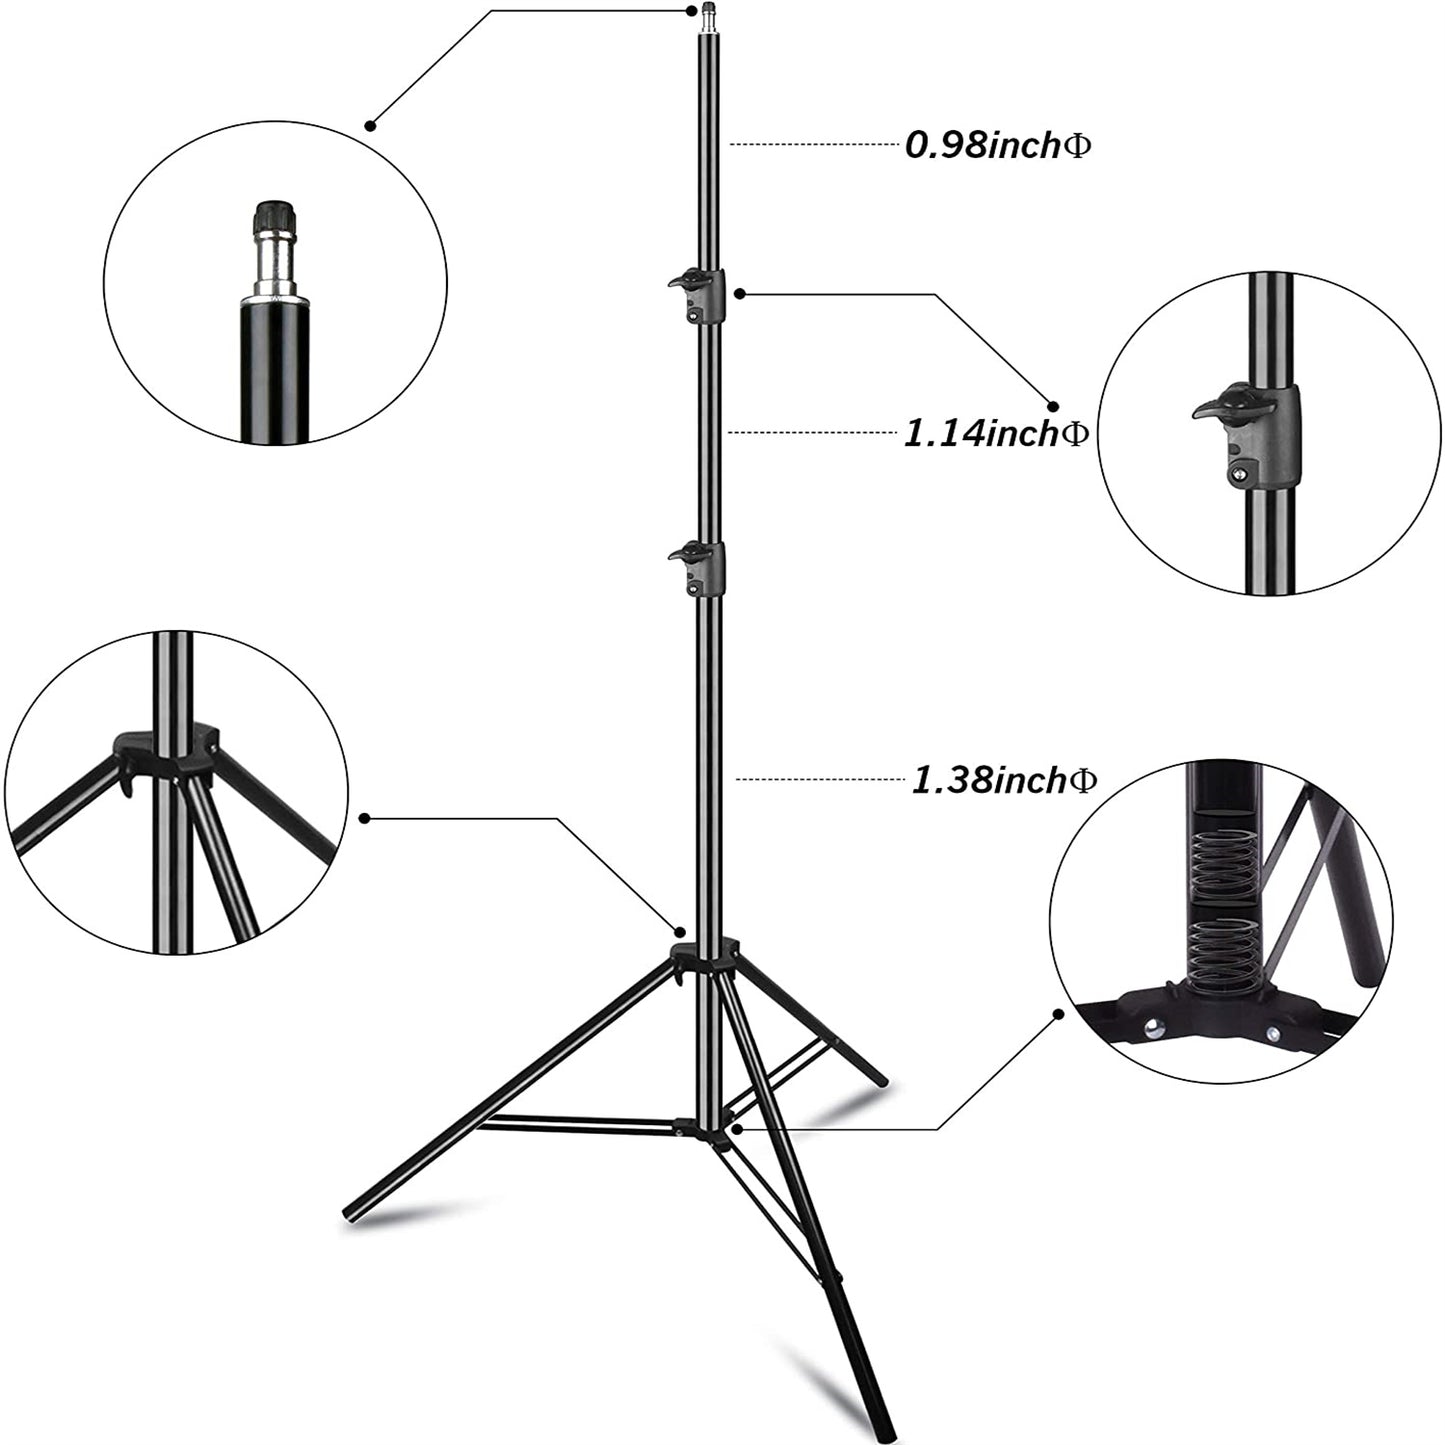 EMART 20x10ft Photo Video Studio Adjustable Heavy Duty Photography Backdrop Stand, Background Support System Kit - EMART INTERNATIONAL, INC (Official Website)